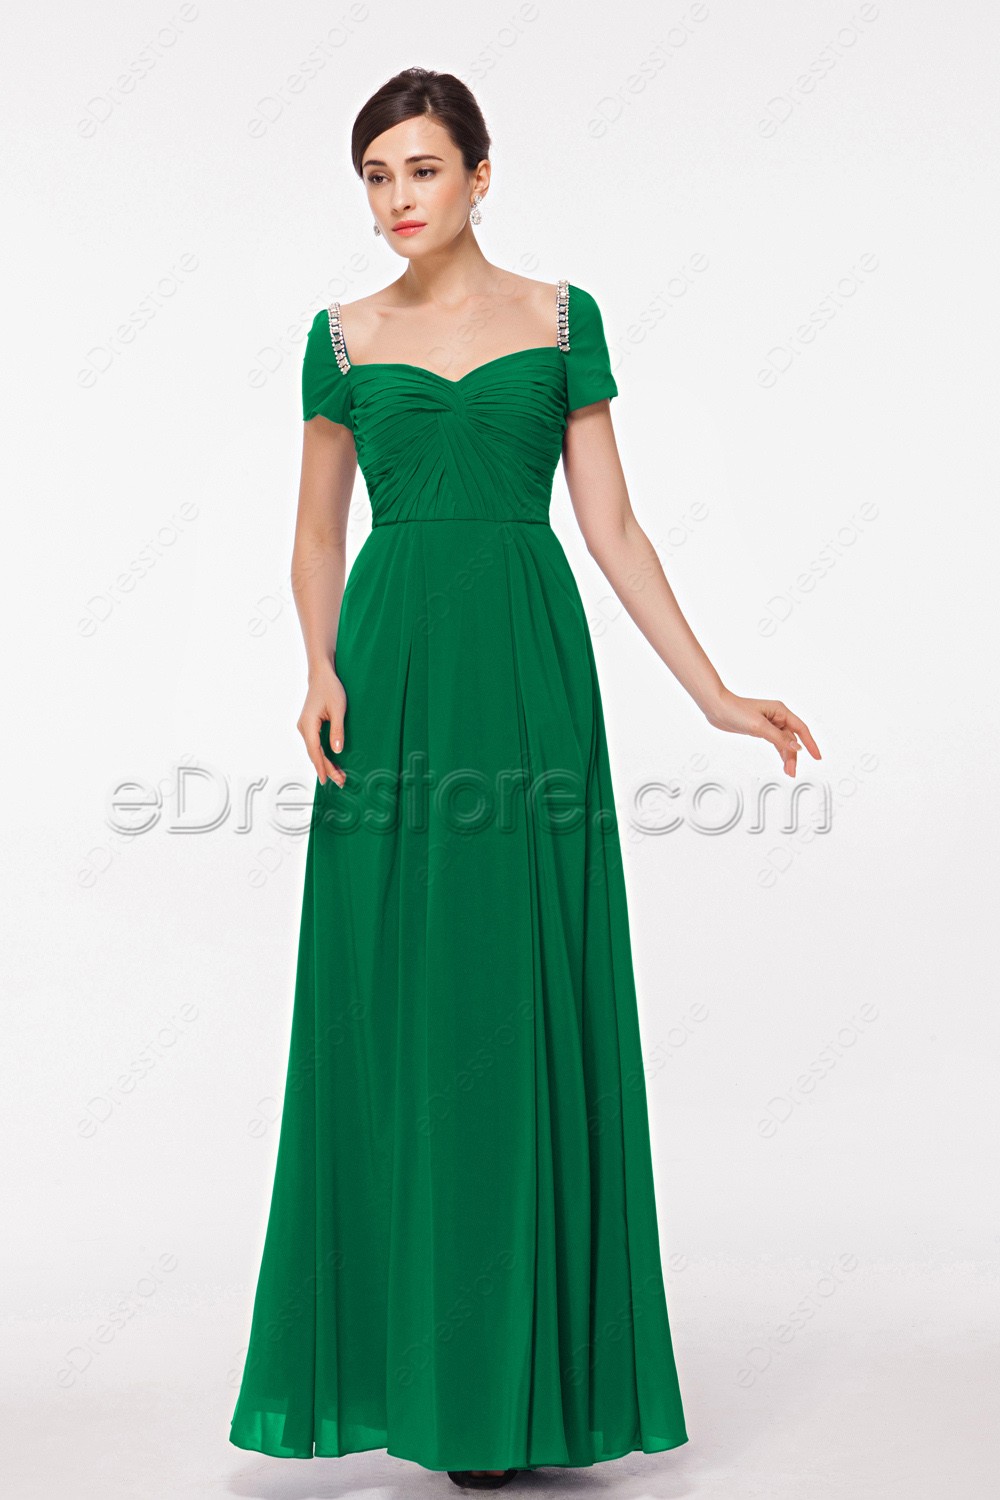 Green evening dresses with sleeves